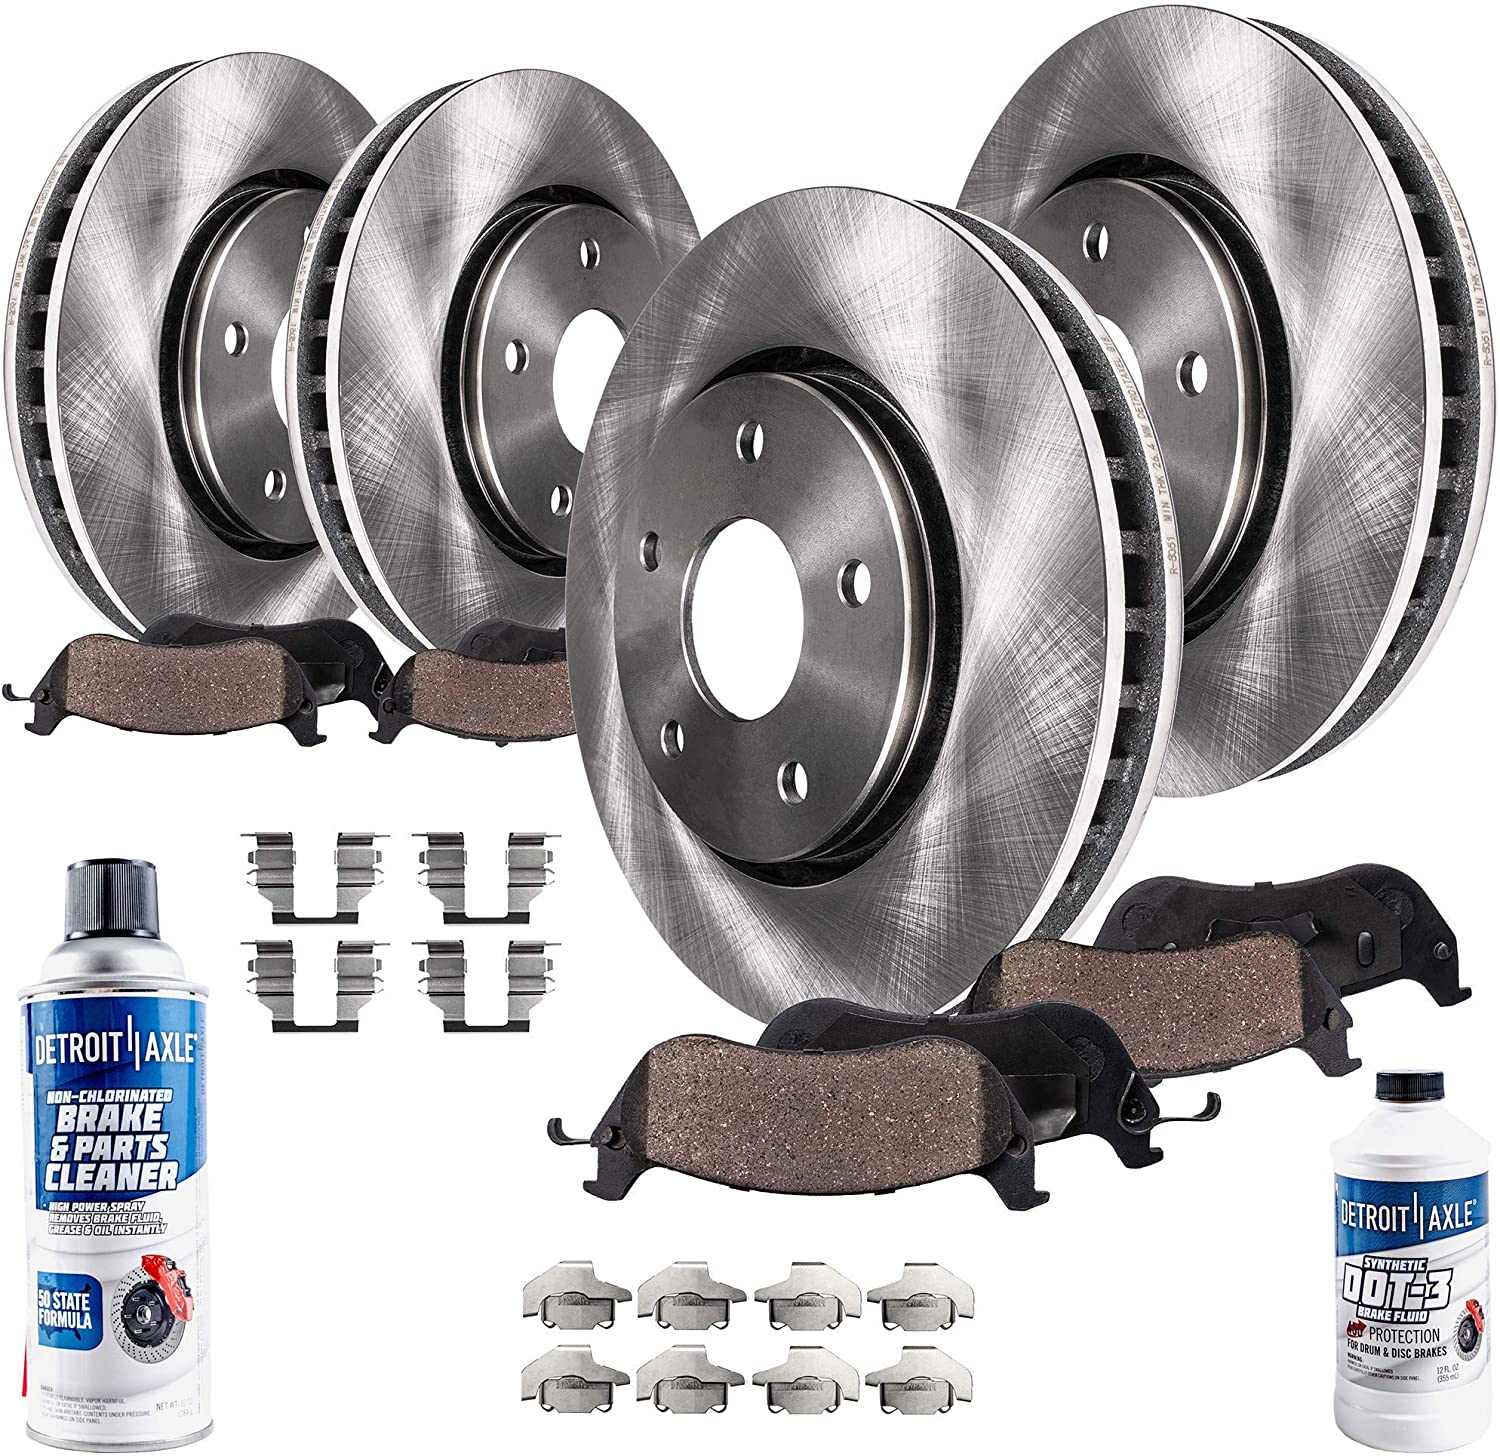 Detroit Axle - READ FITMENT 320mm Front and 280mm Rear Disc Brake Rotors Ceramic Pads w/Hardware + Brake Cleaner Fluid for 2013-2016 Ford Escape 1.6L AWD & 2.0L - [2014-2015 Transit]